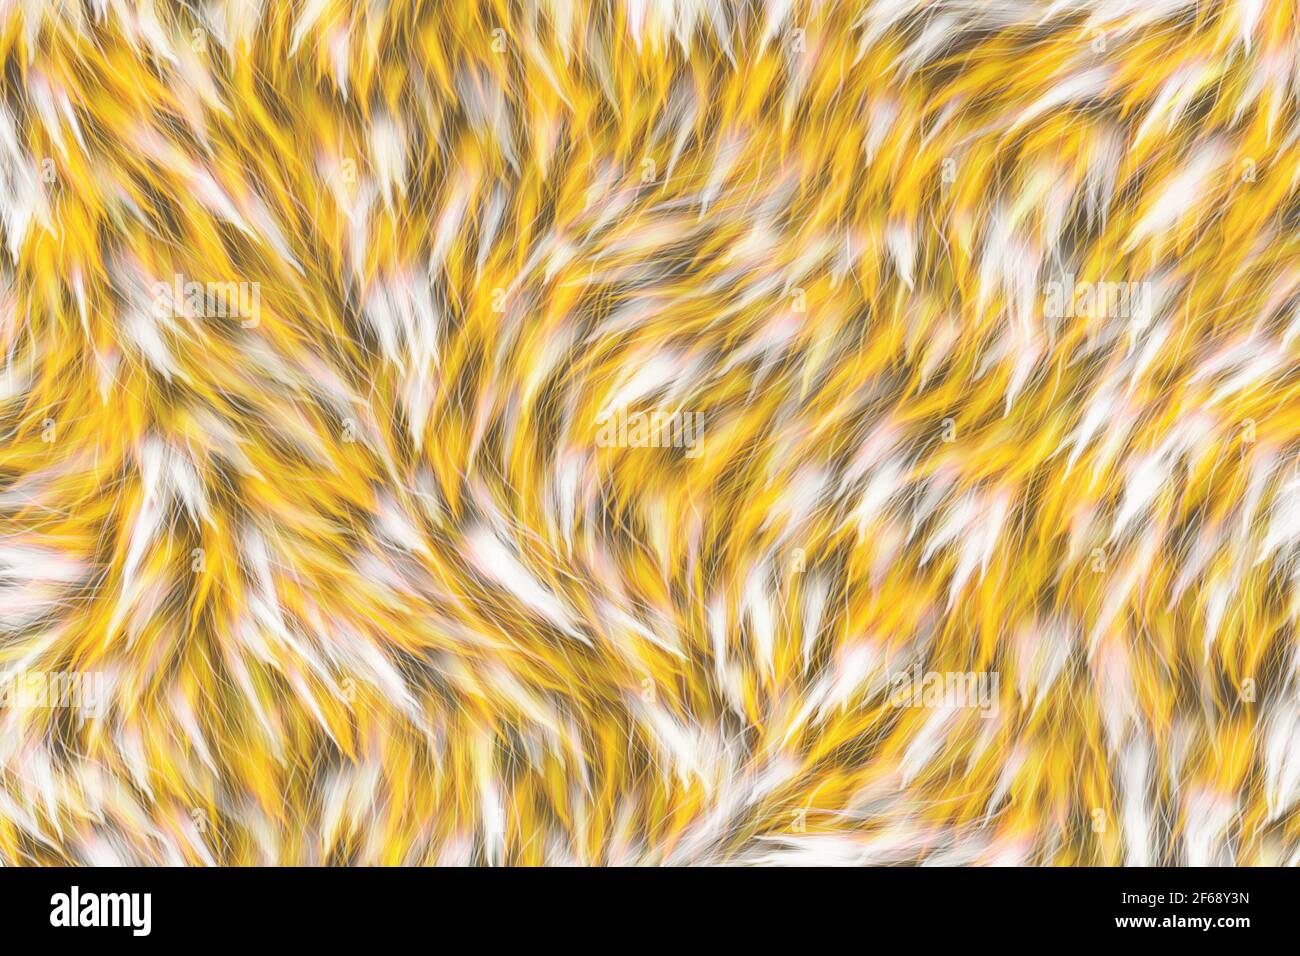 thick animal warm colored hair background Stock Photo